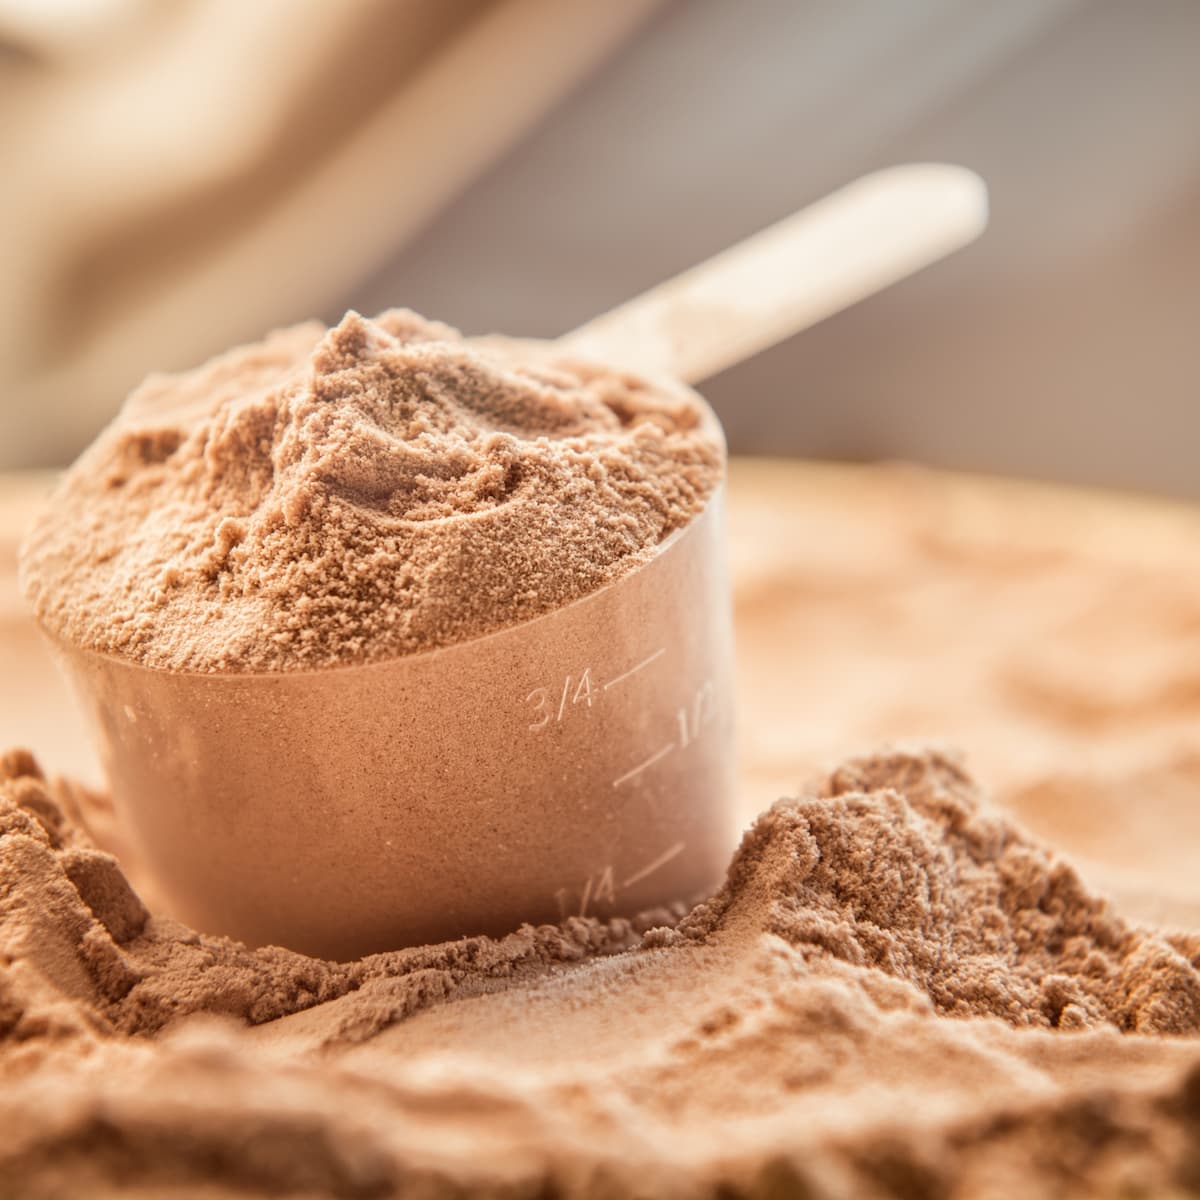 Impact of whey protein powder on skin condition and acne development.